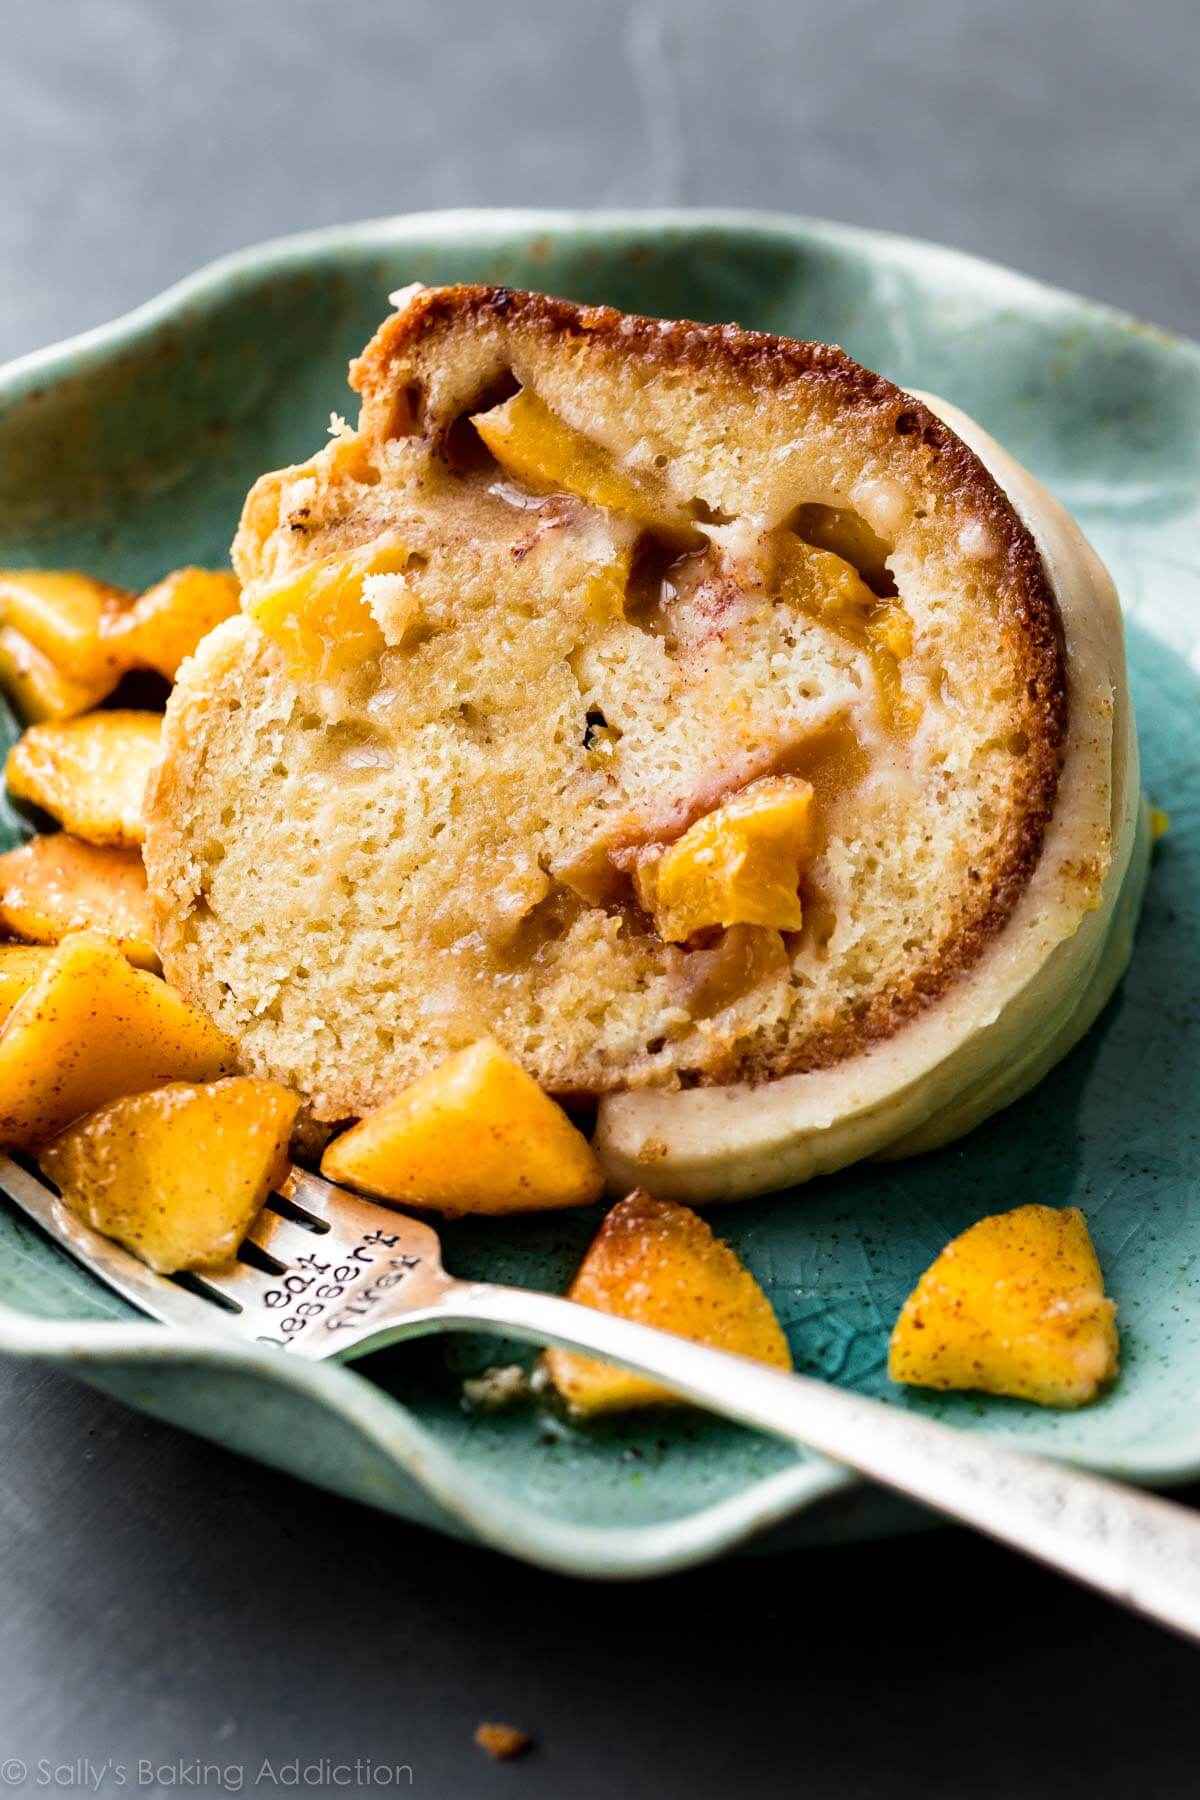 slice of peach bundt cake on a teal plate with a fork